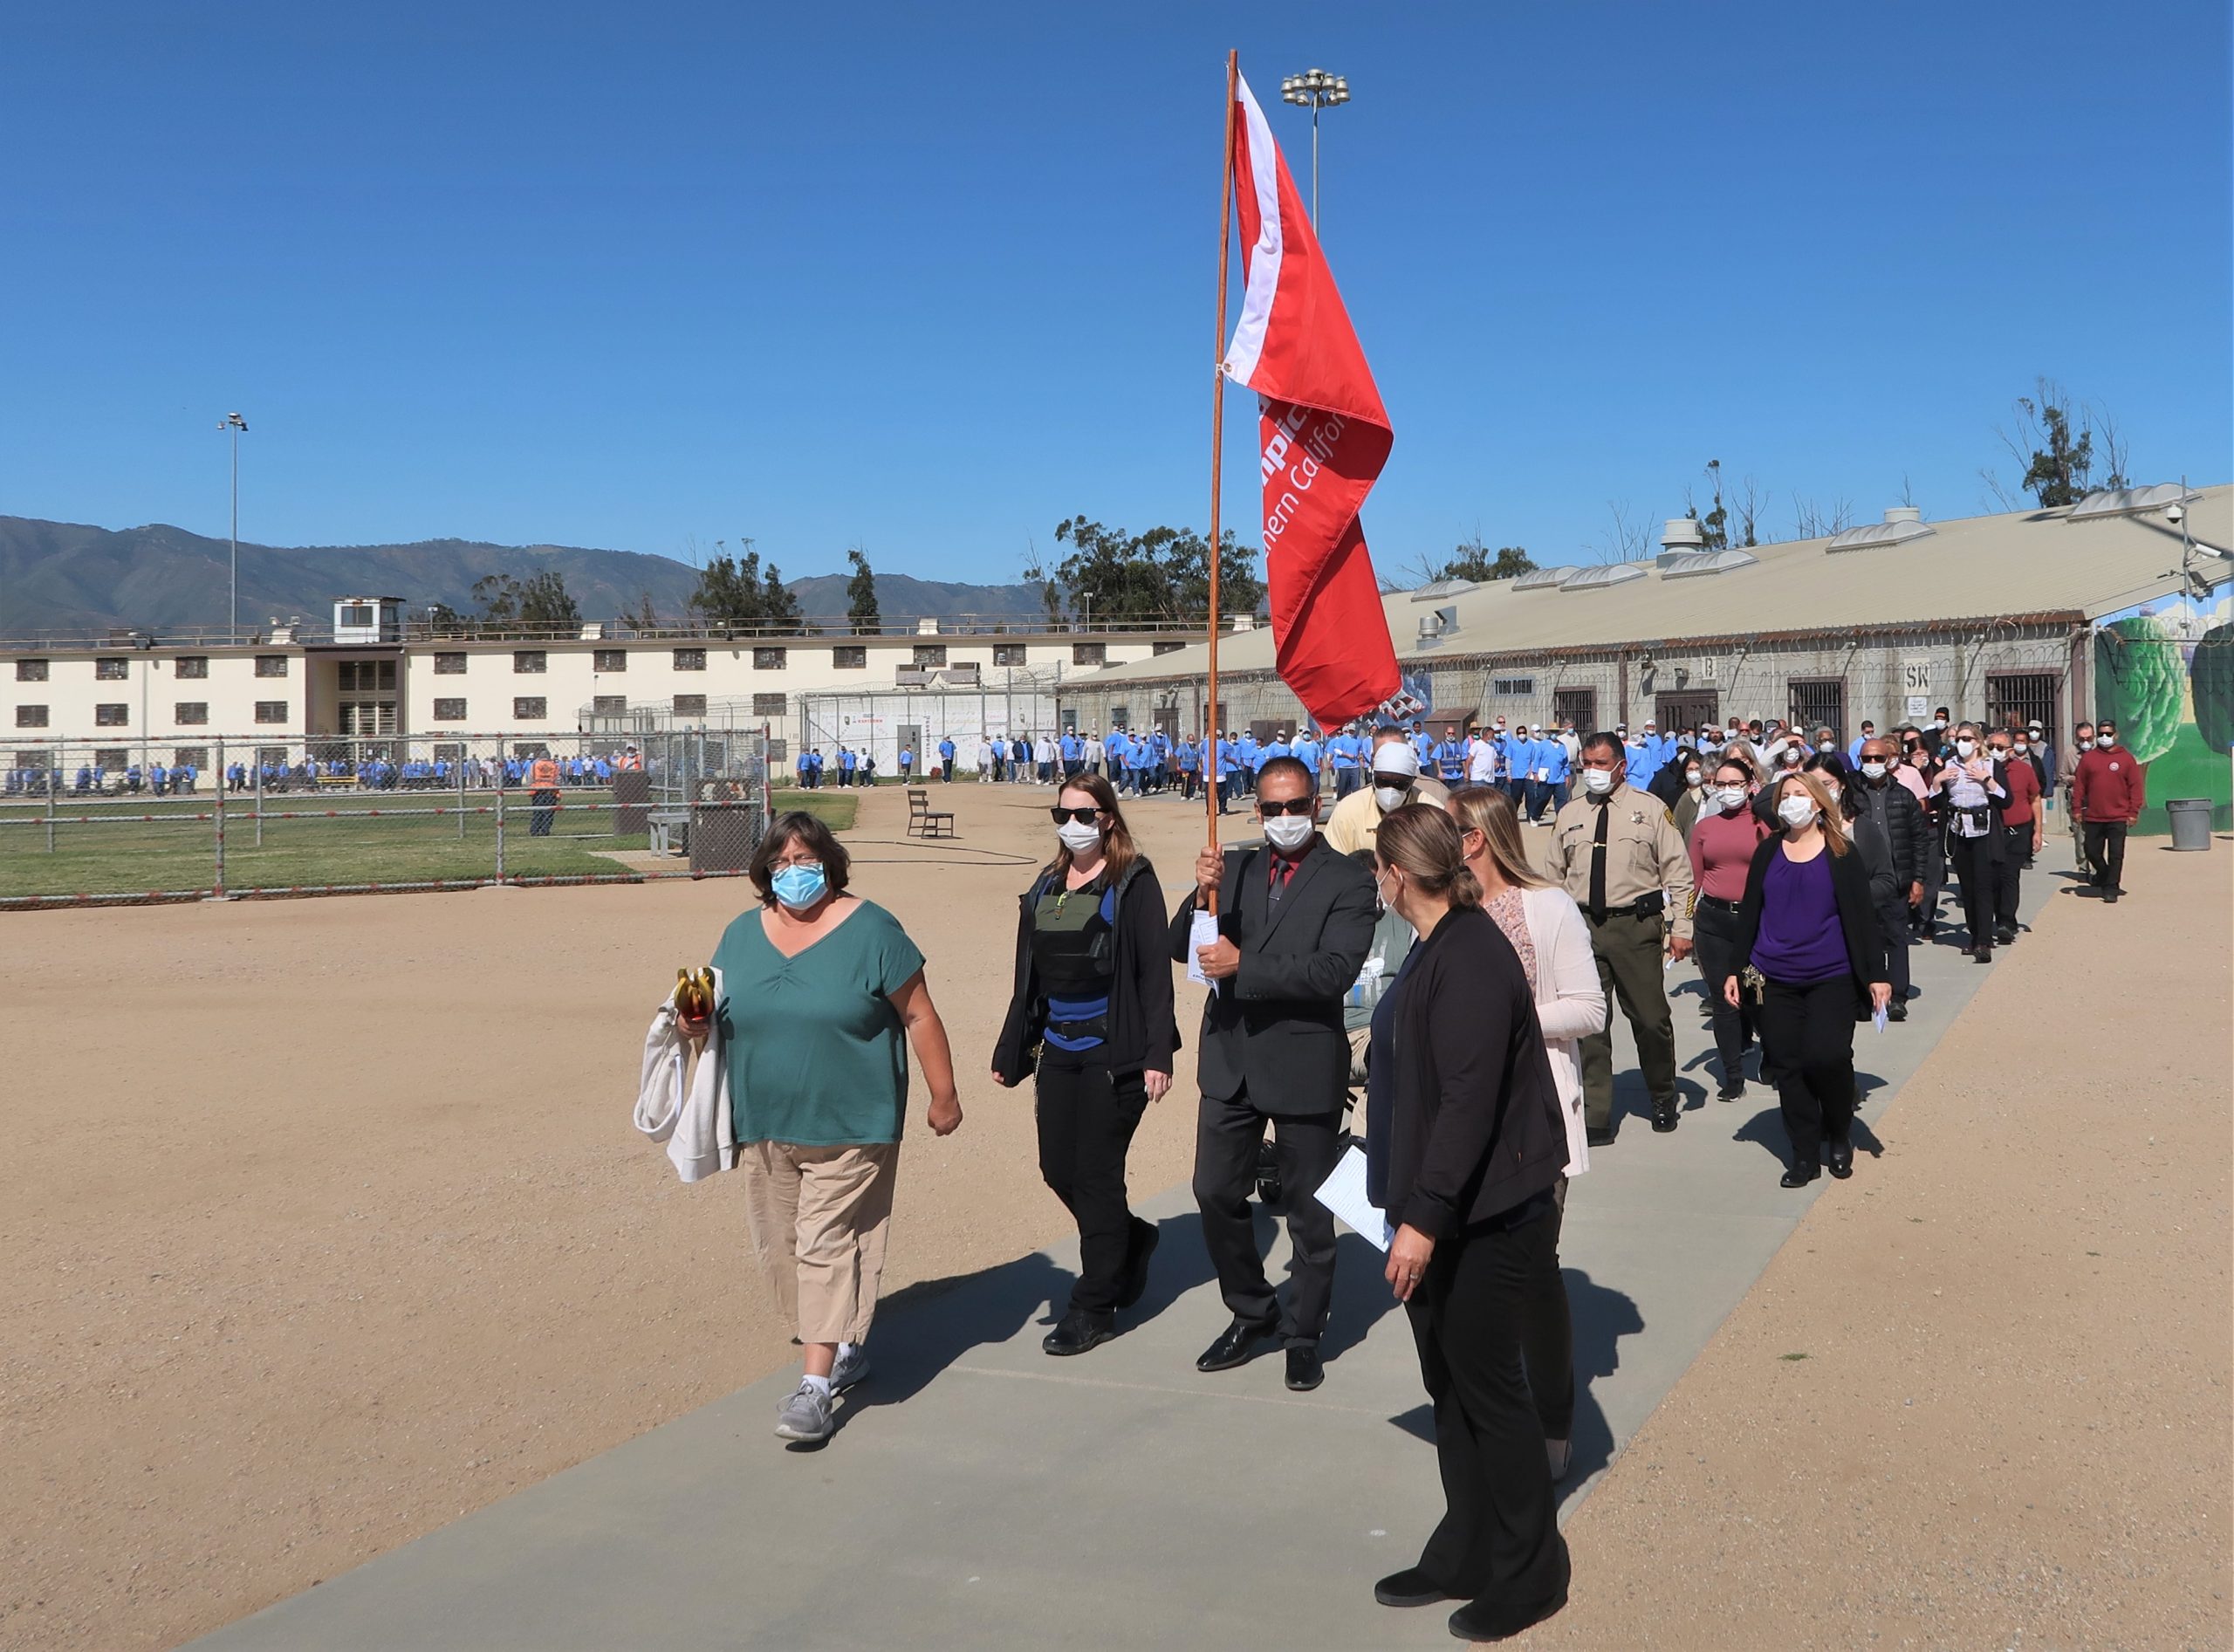 Prison inmates, warden walk while carrying a Special Olympics flag.